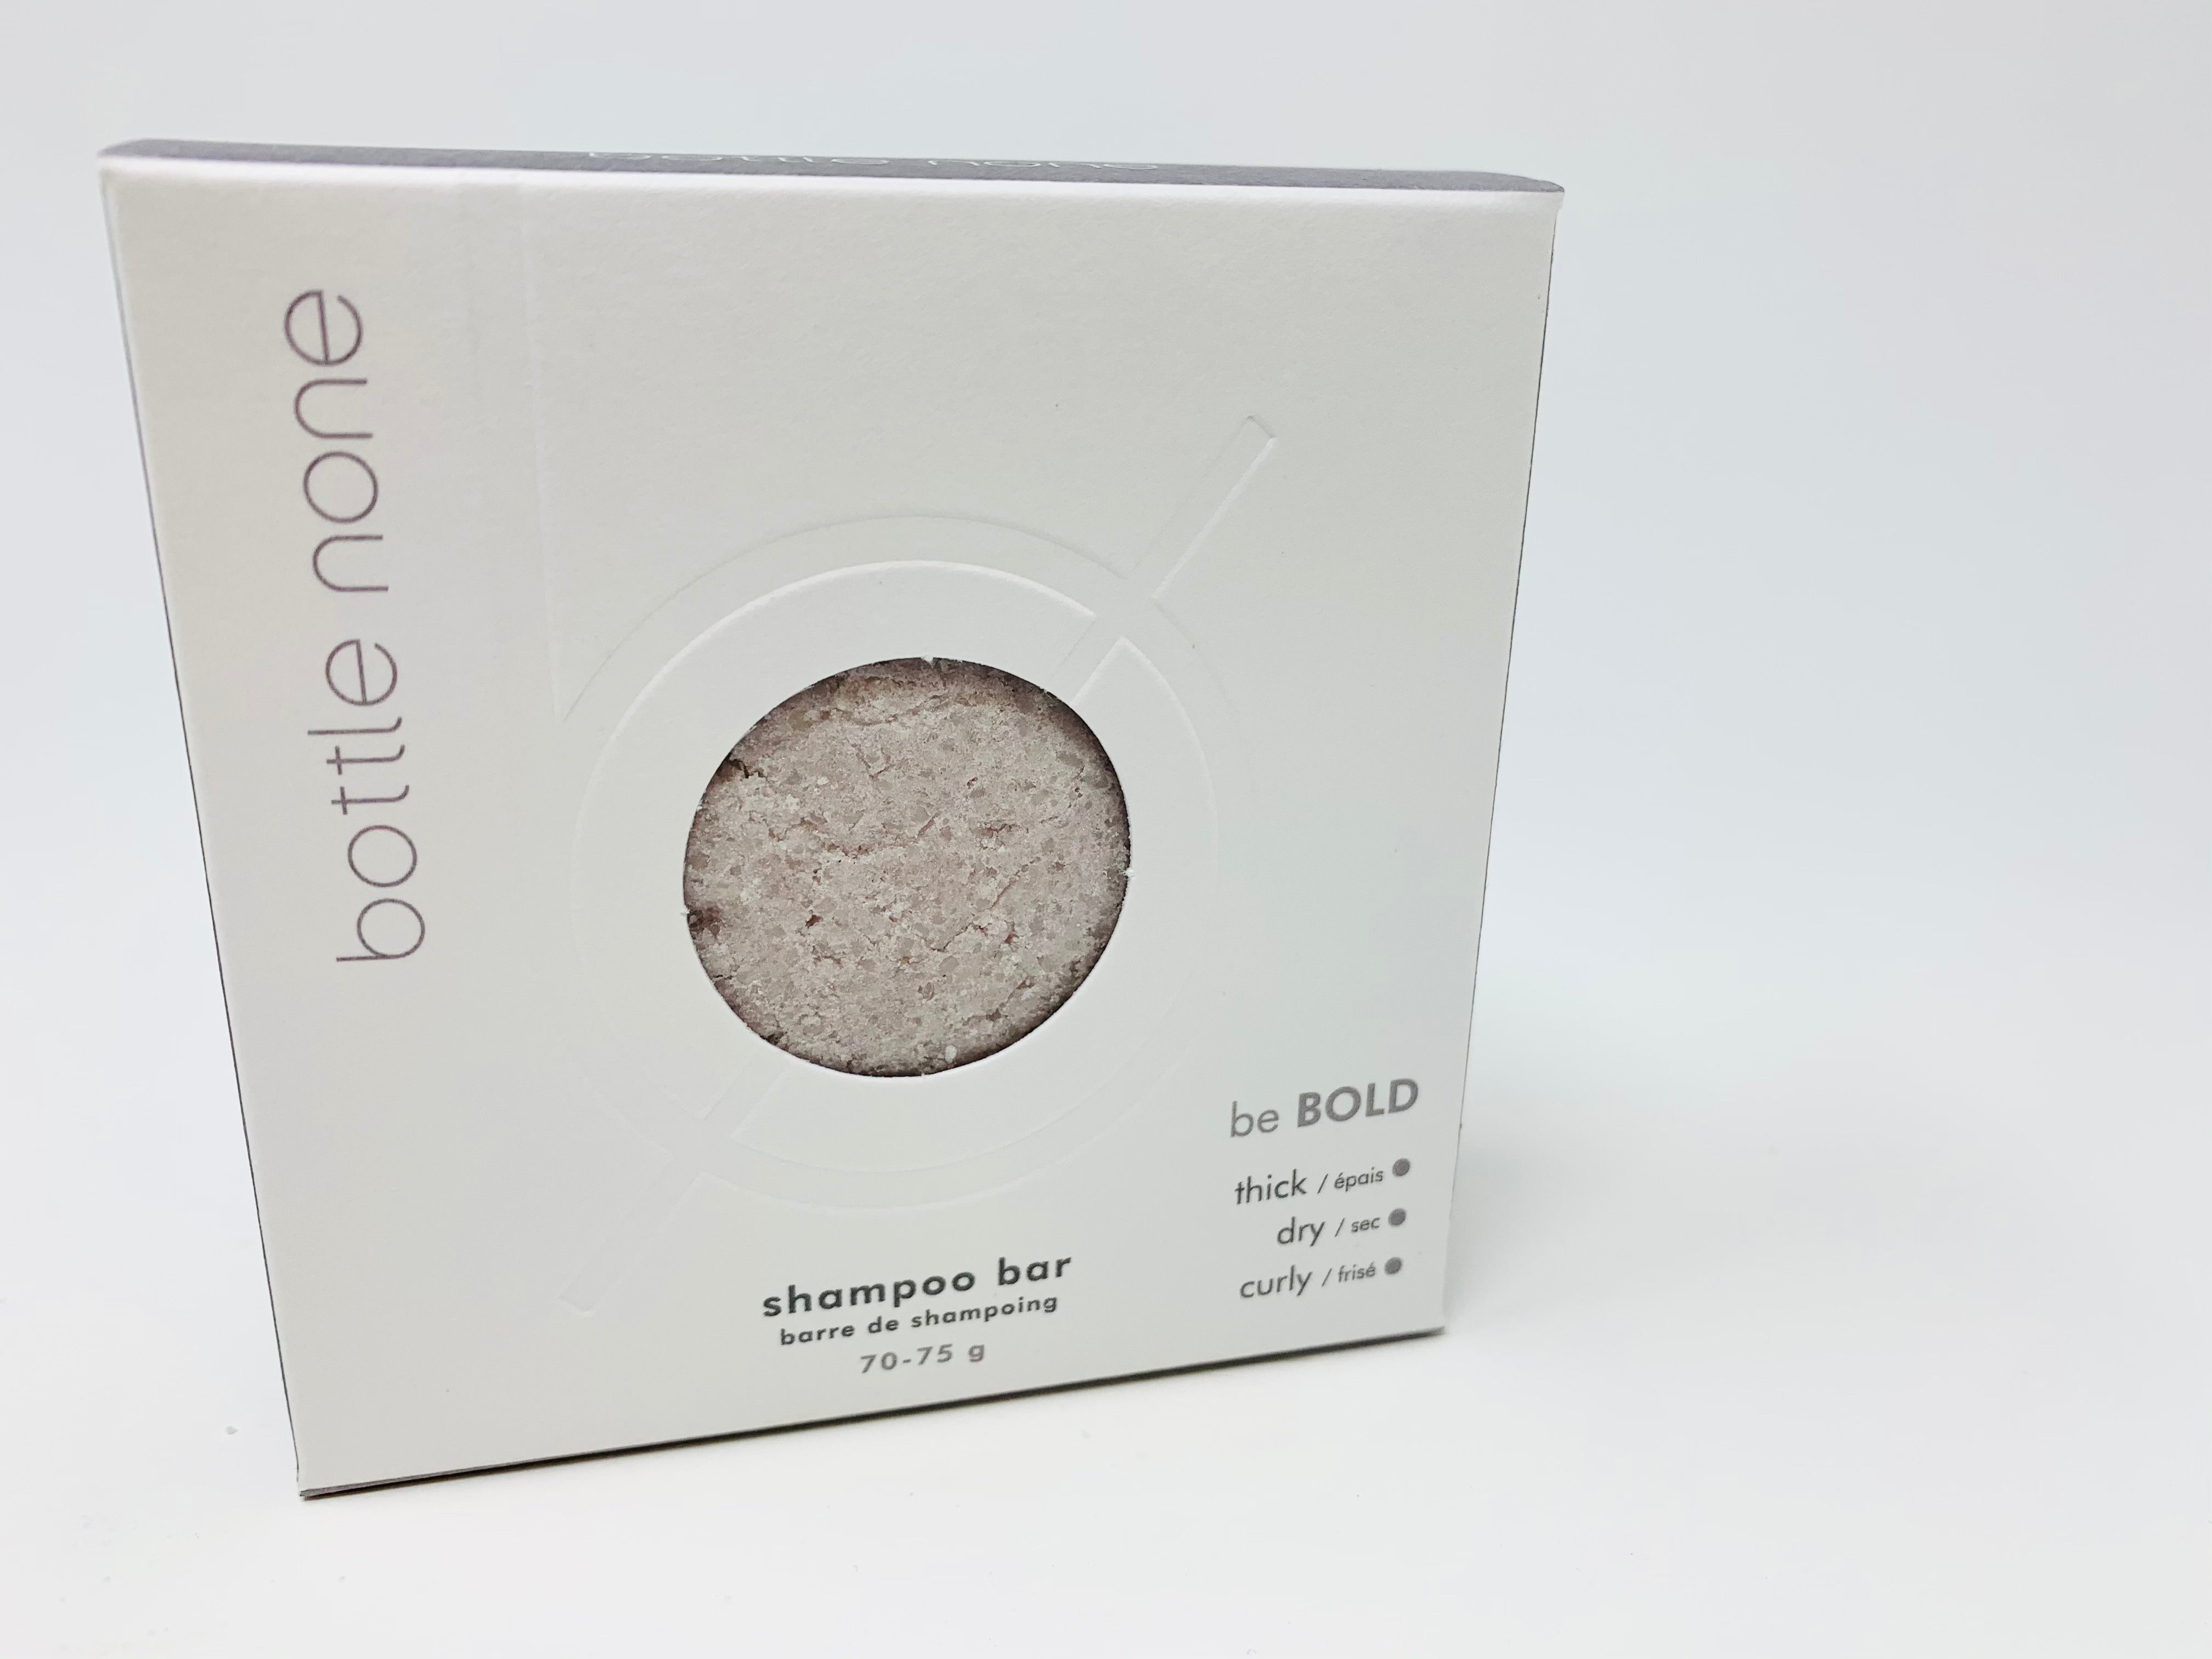 be BOLD Shampoo Bar 70-75g - WHOLESALE be BOLD - nelsonnaturals remineralizing toothpaste